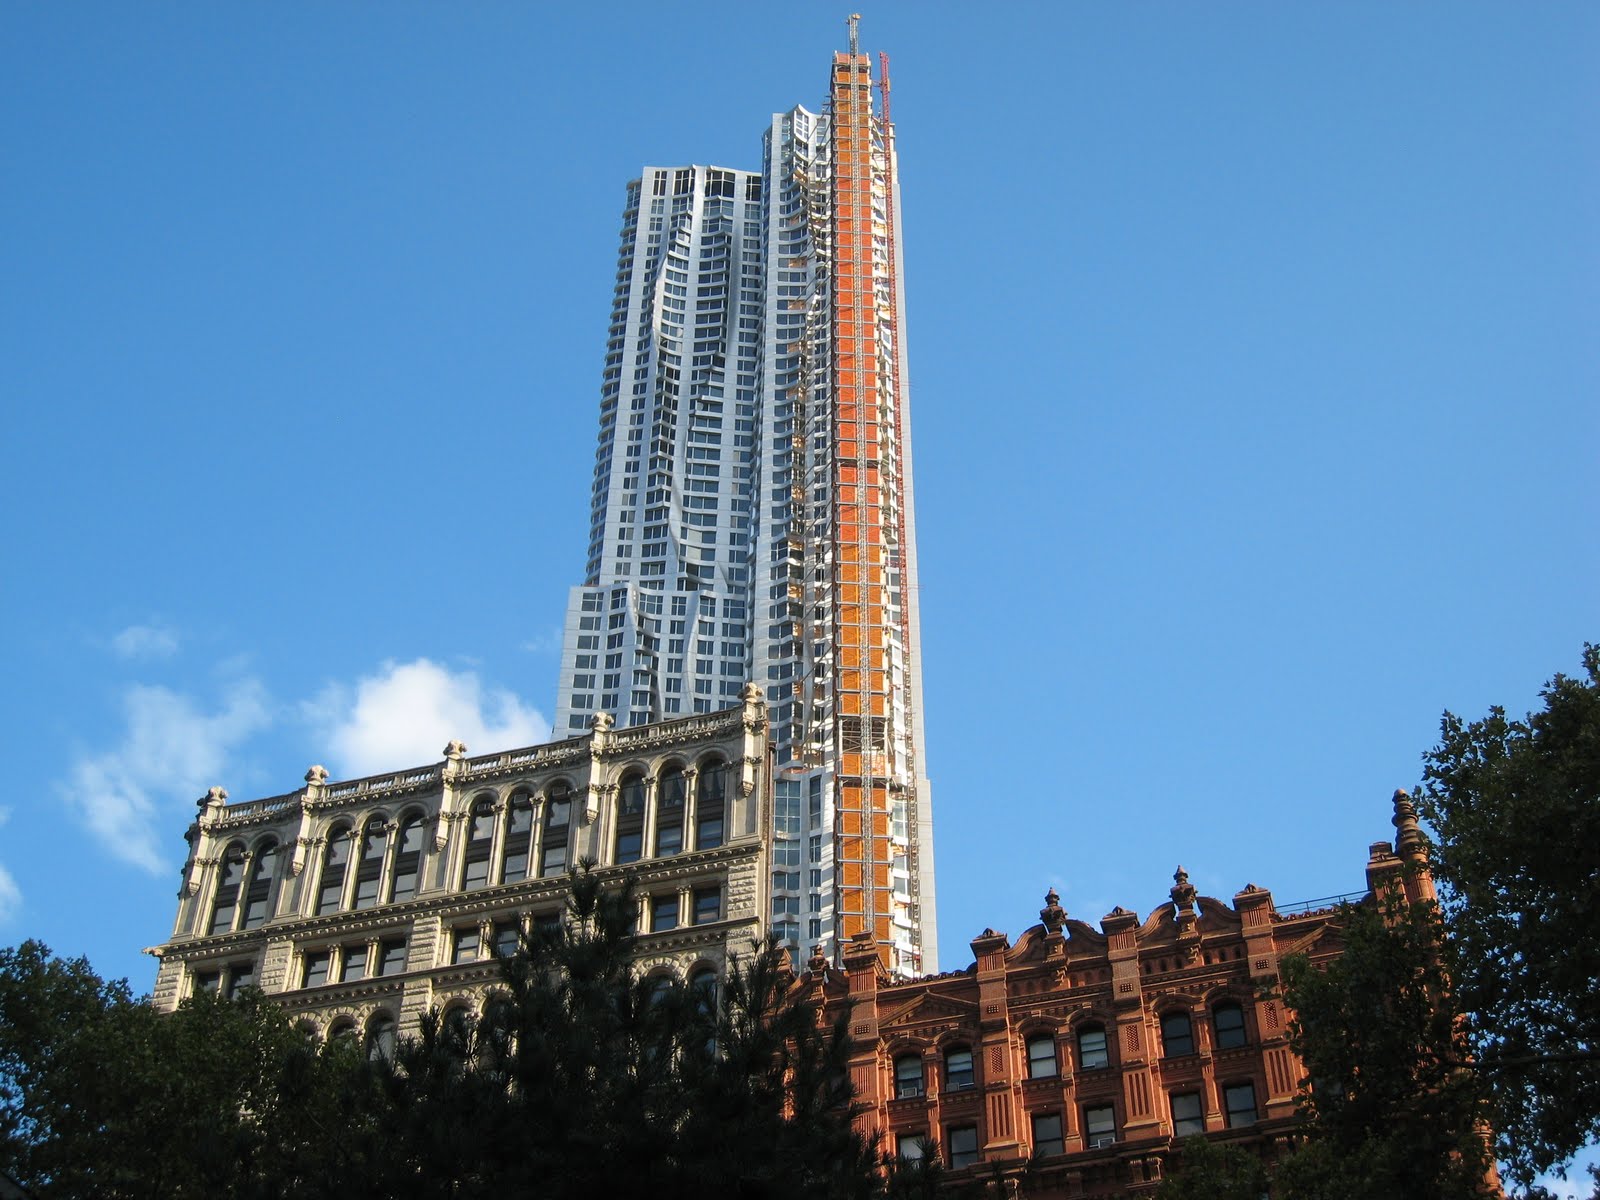 PRESERVATOR: Photo Friday: The Beekman Tower